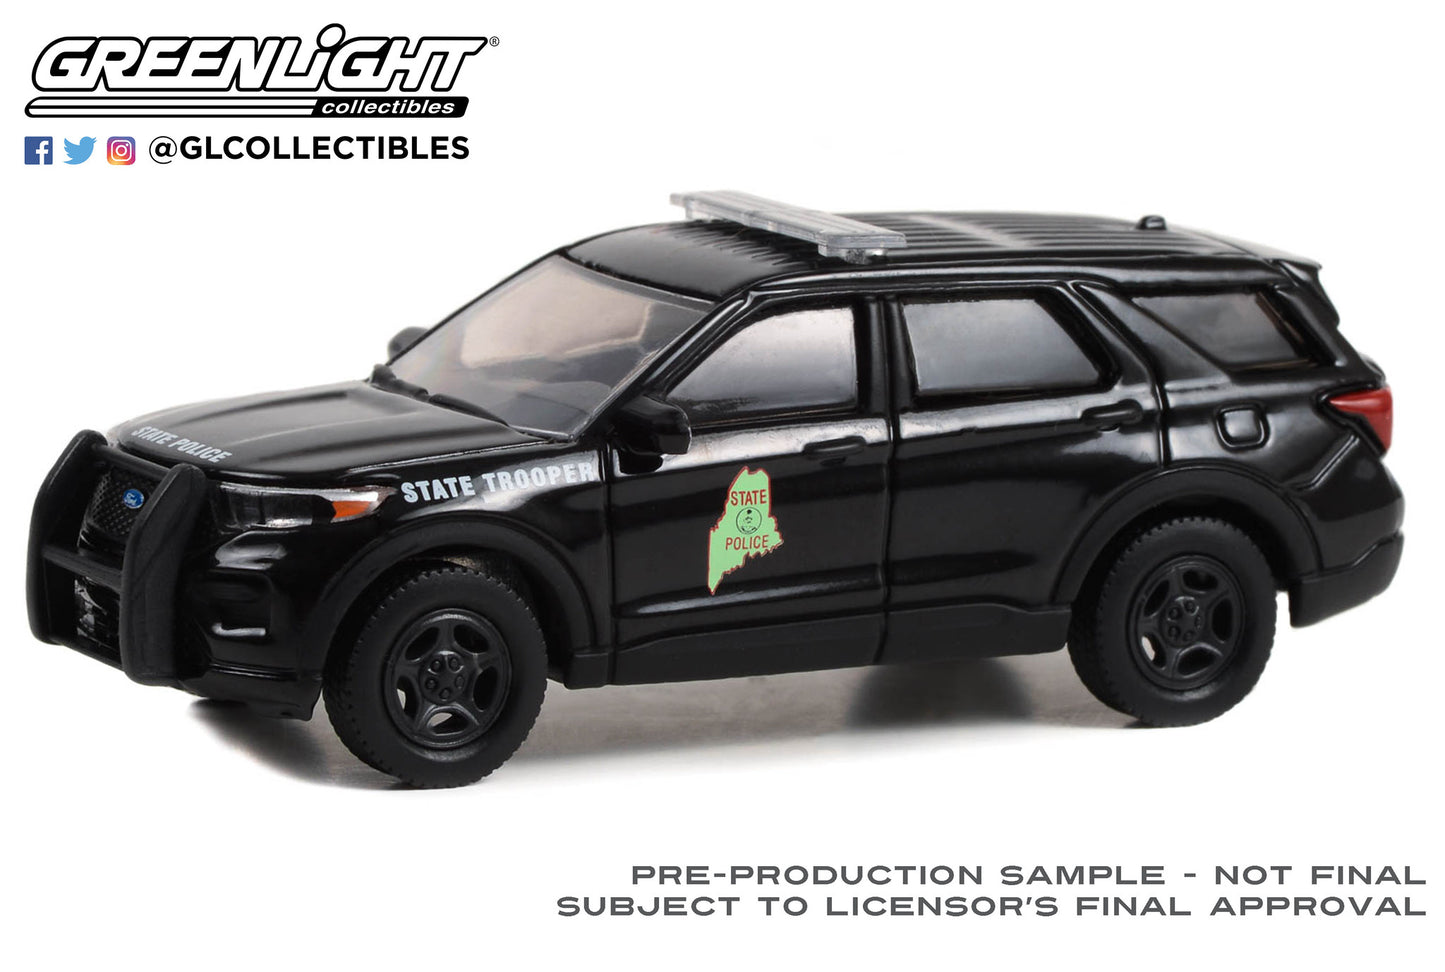 GreenLight 1:64 Anniversary Collection Series 15 - 2021 Ford Police Interceptor Utility - Maine State Police 100th Anniversary Livery 28120-E